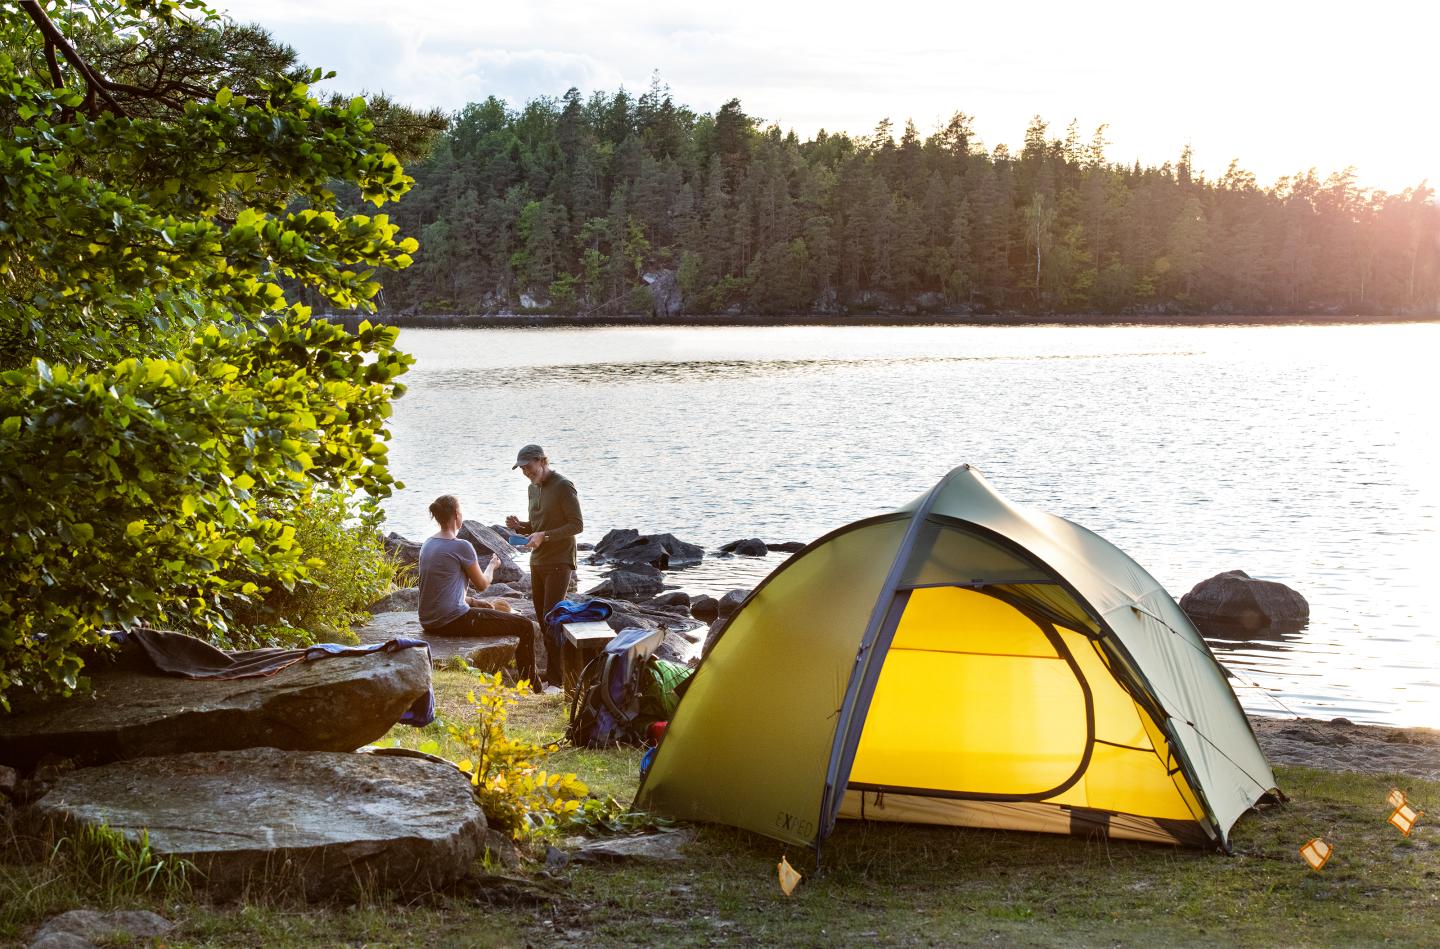 People setting up their camping next to a lake with a forest in the background